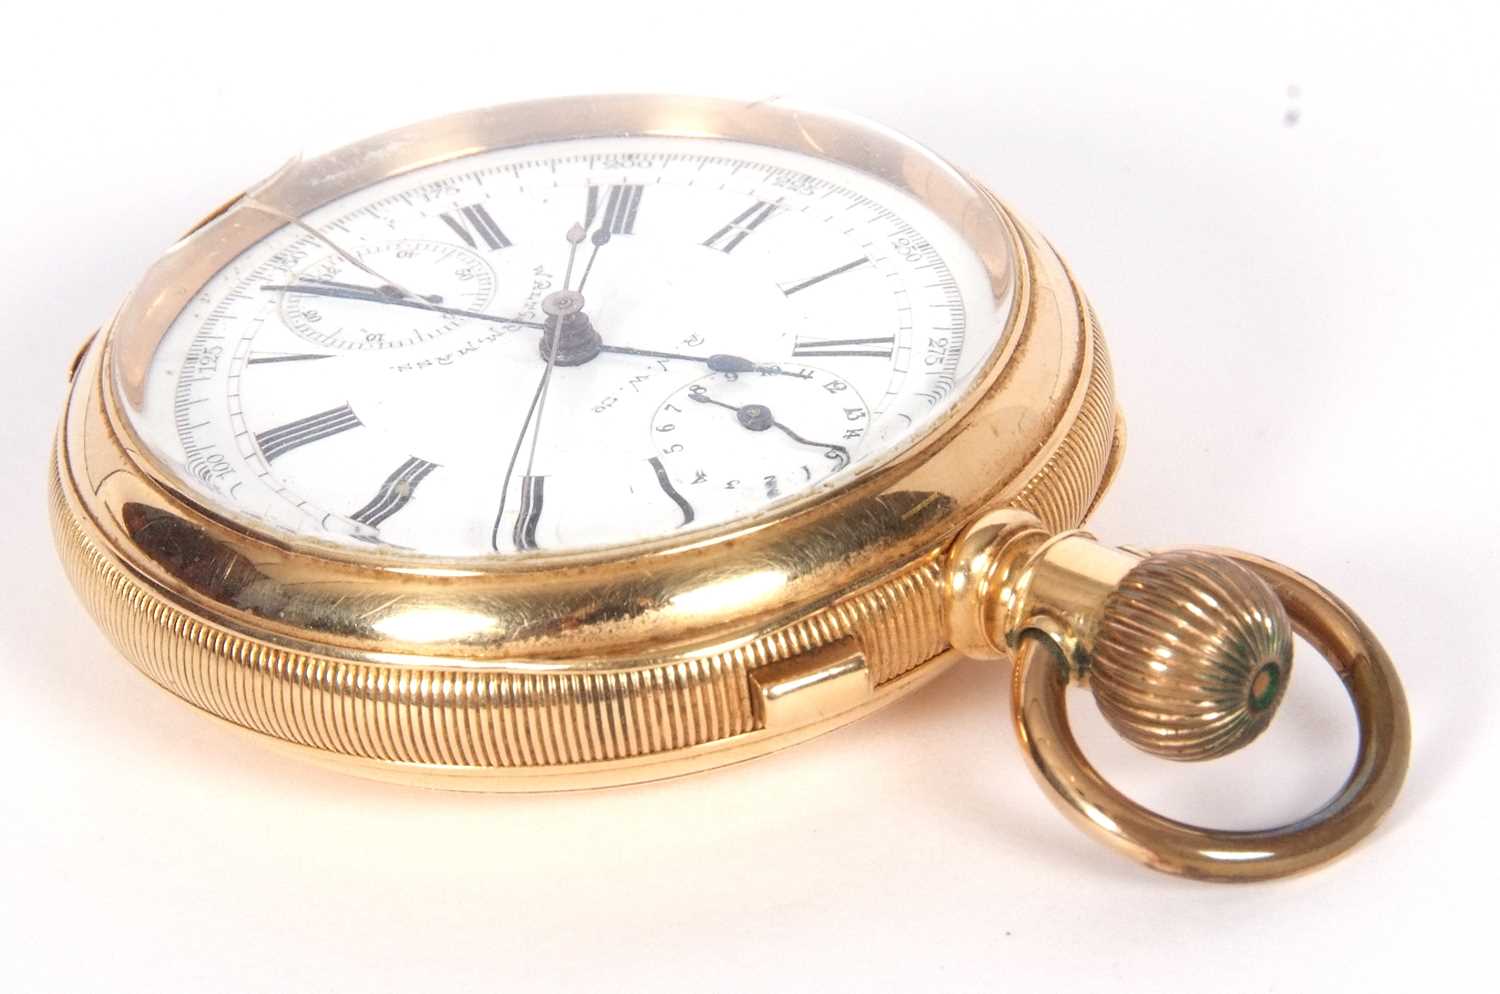 Waltham yellow metal chronograph pocket watch stamped 18k in the case back, it has a white enamel - Image 3 of 7